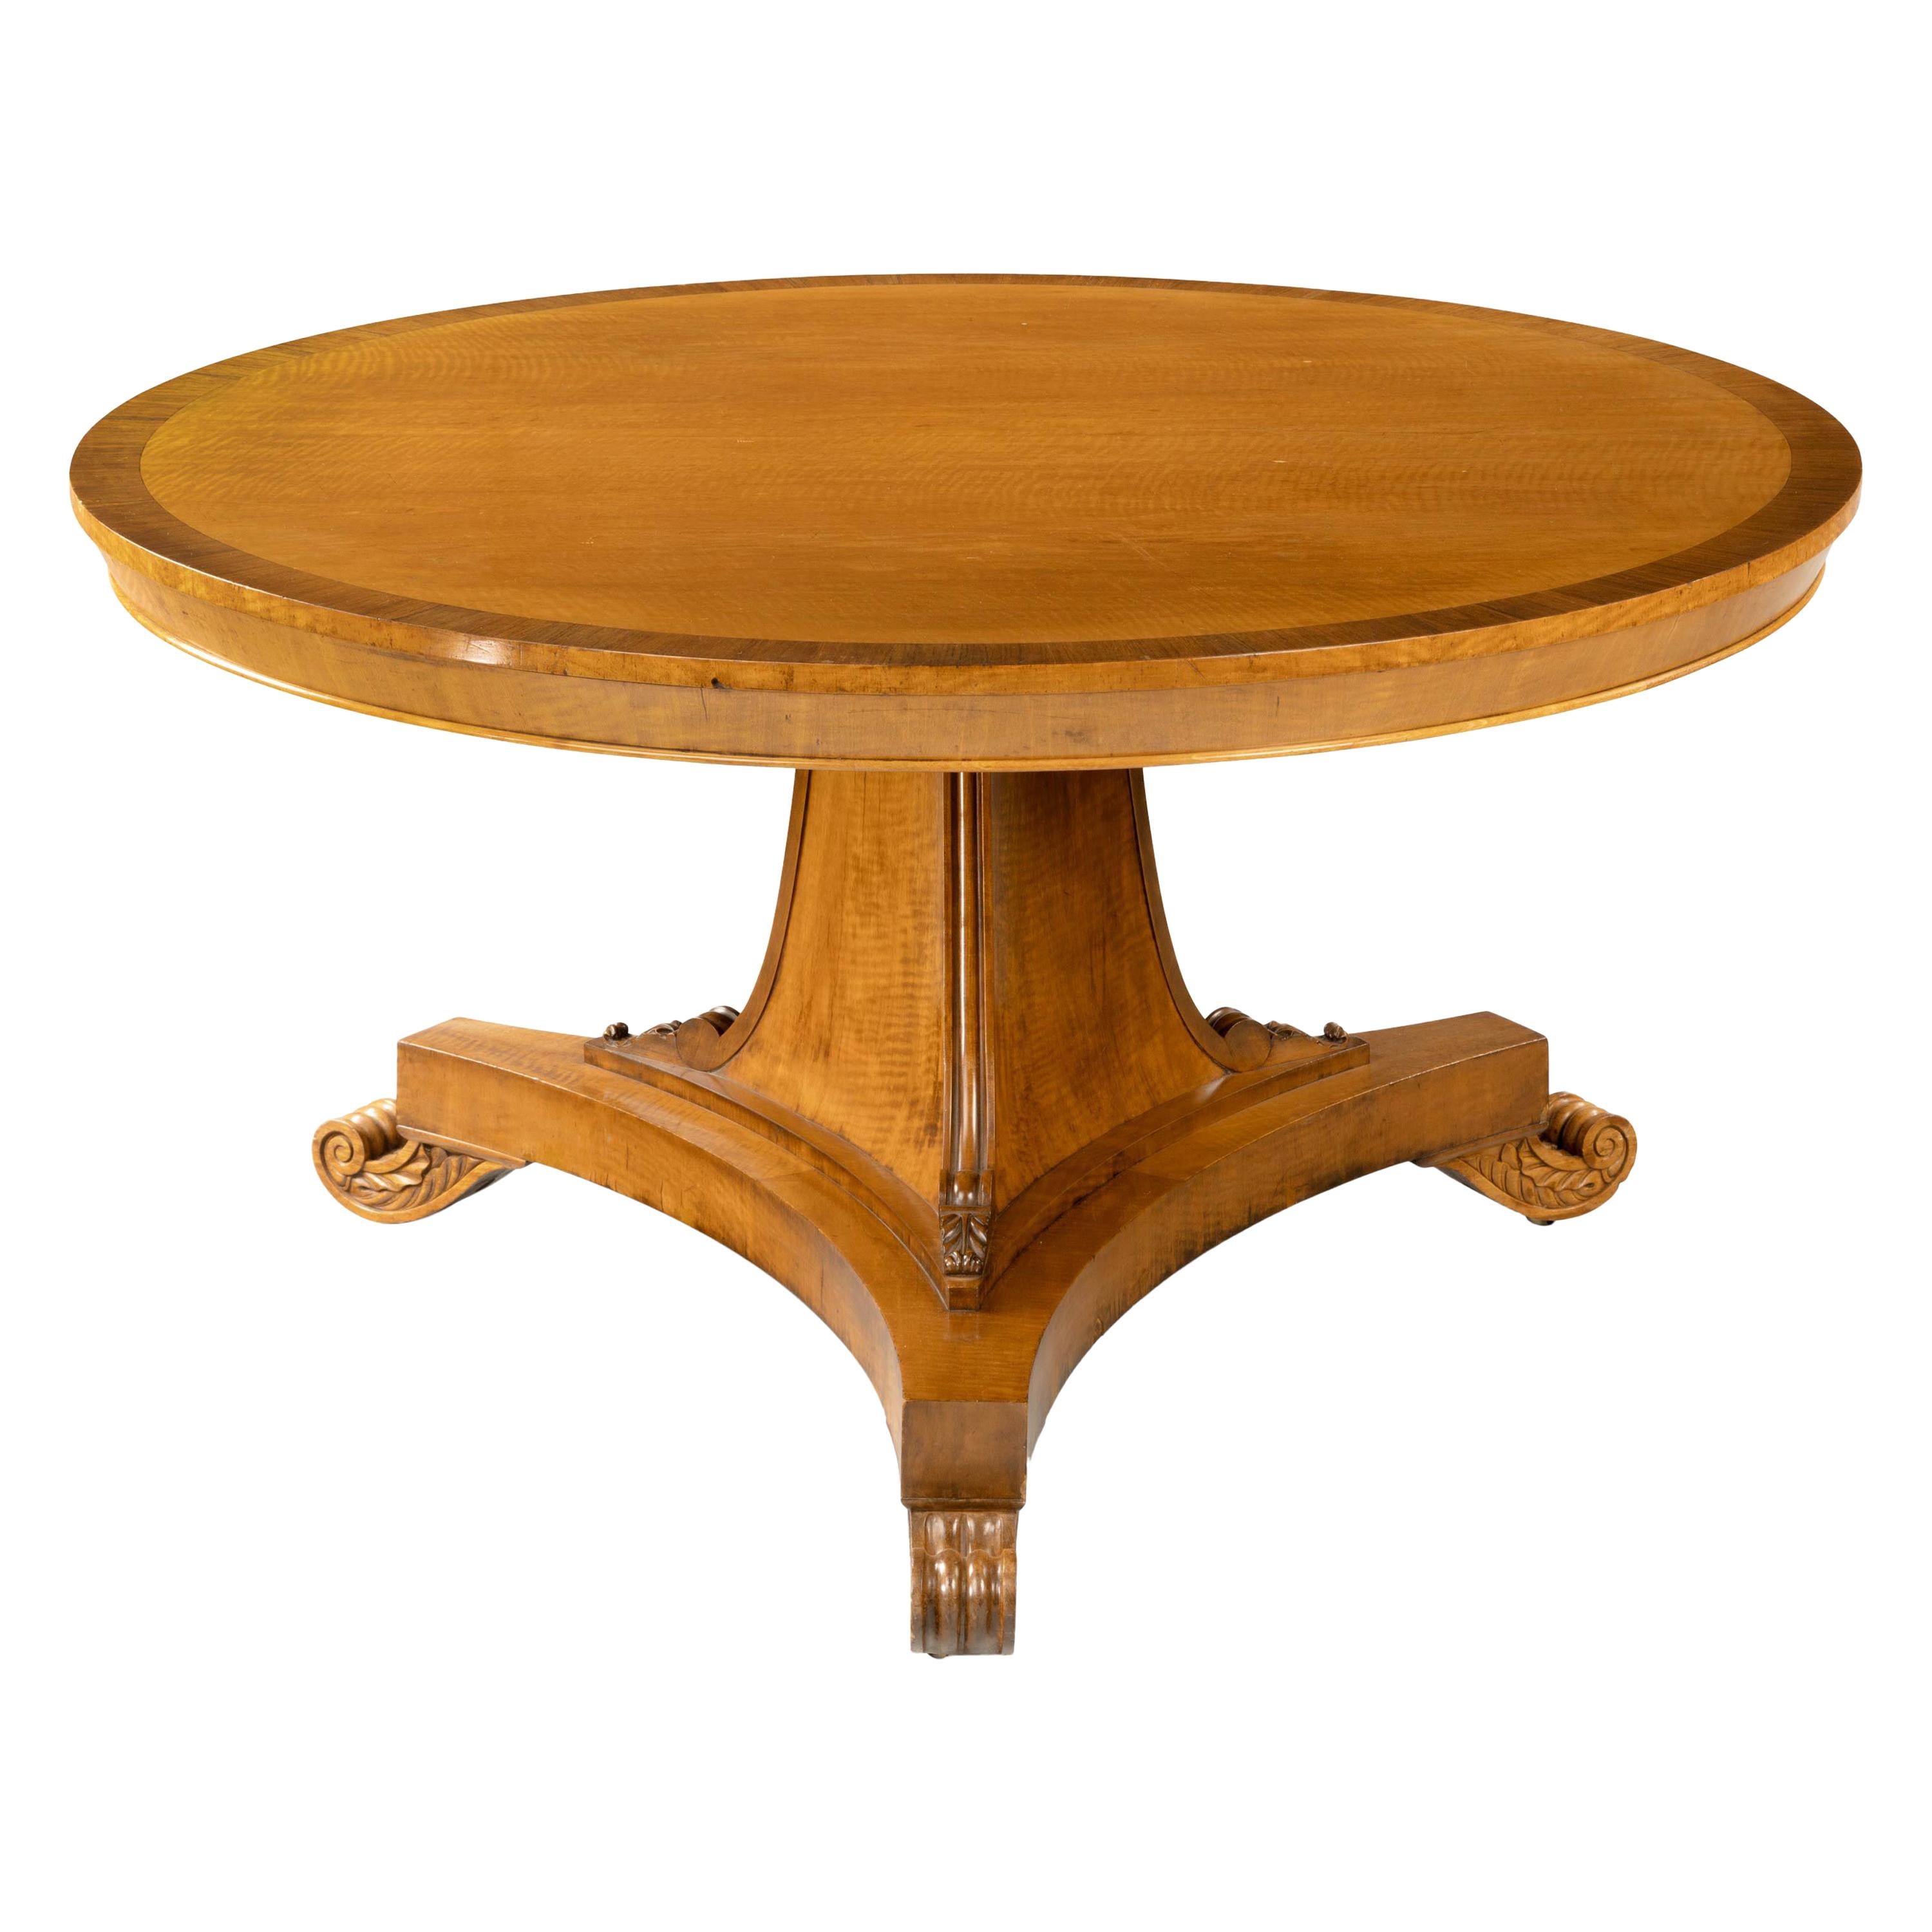 Fine Quality Regency Period Maple and Rosewood Centre Table